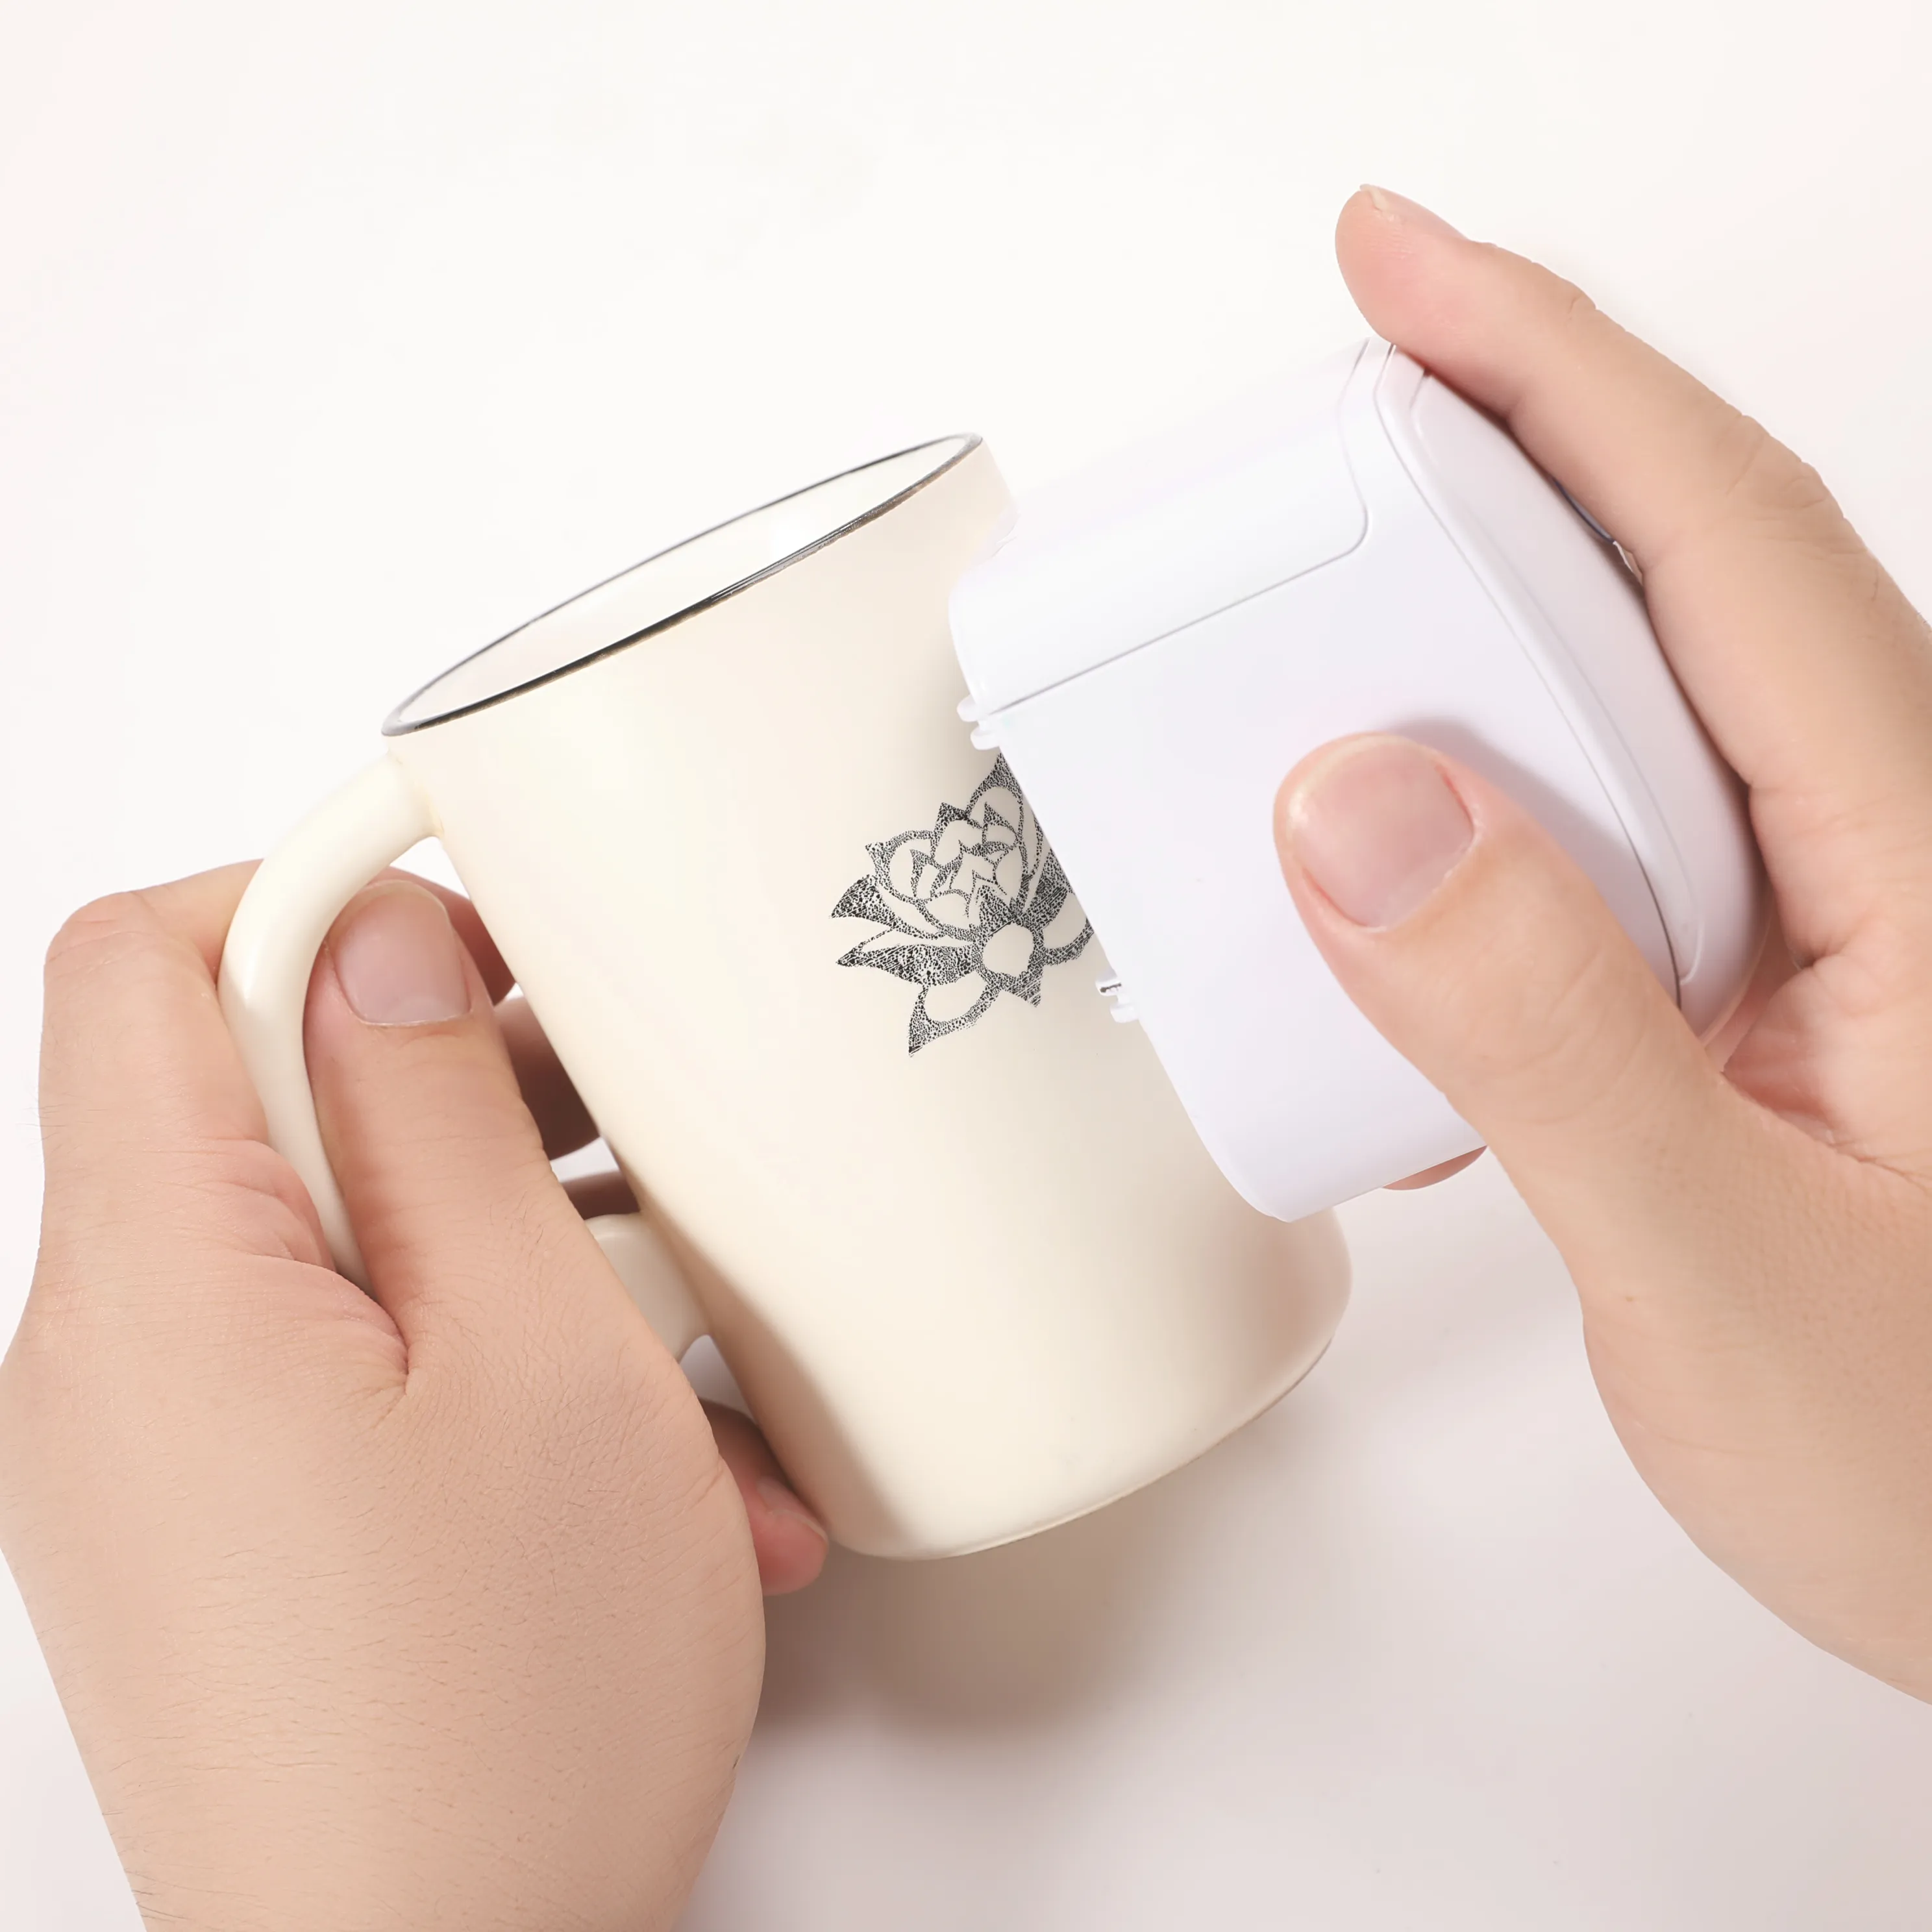 handheld tattoo printer with voice prompt connected with wifi handheld printer